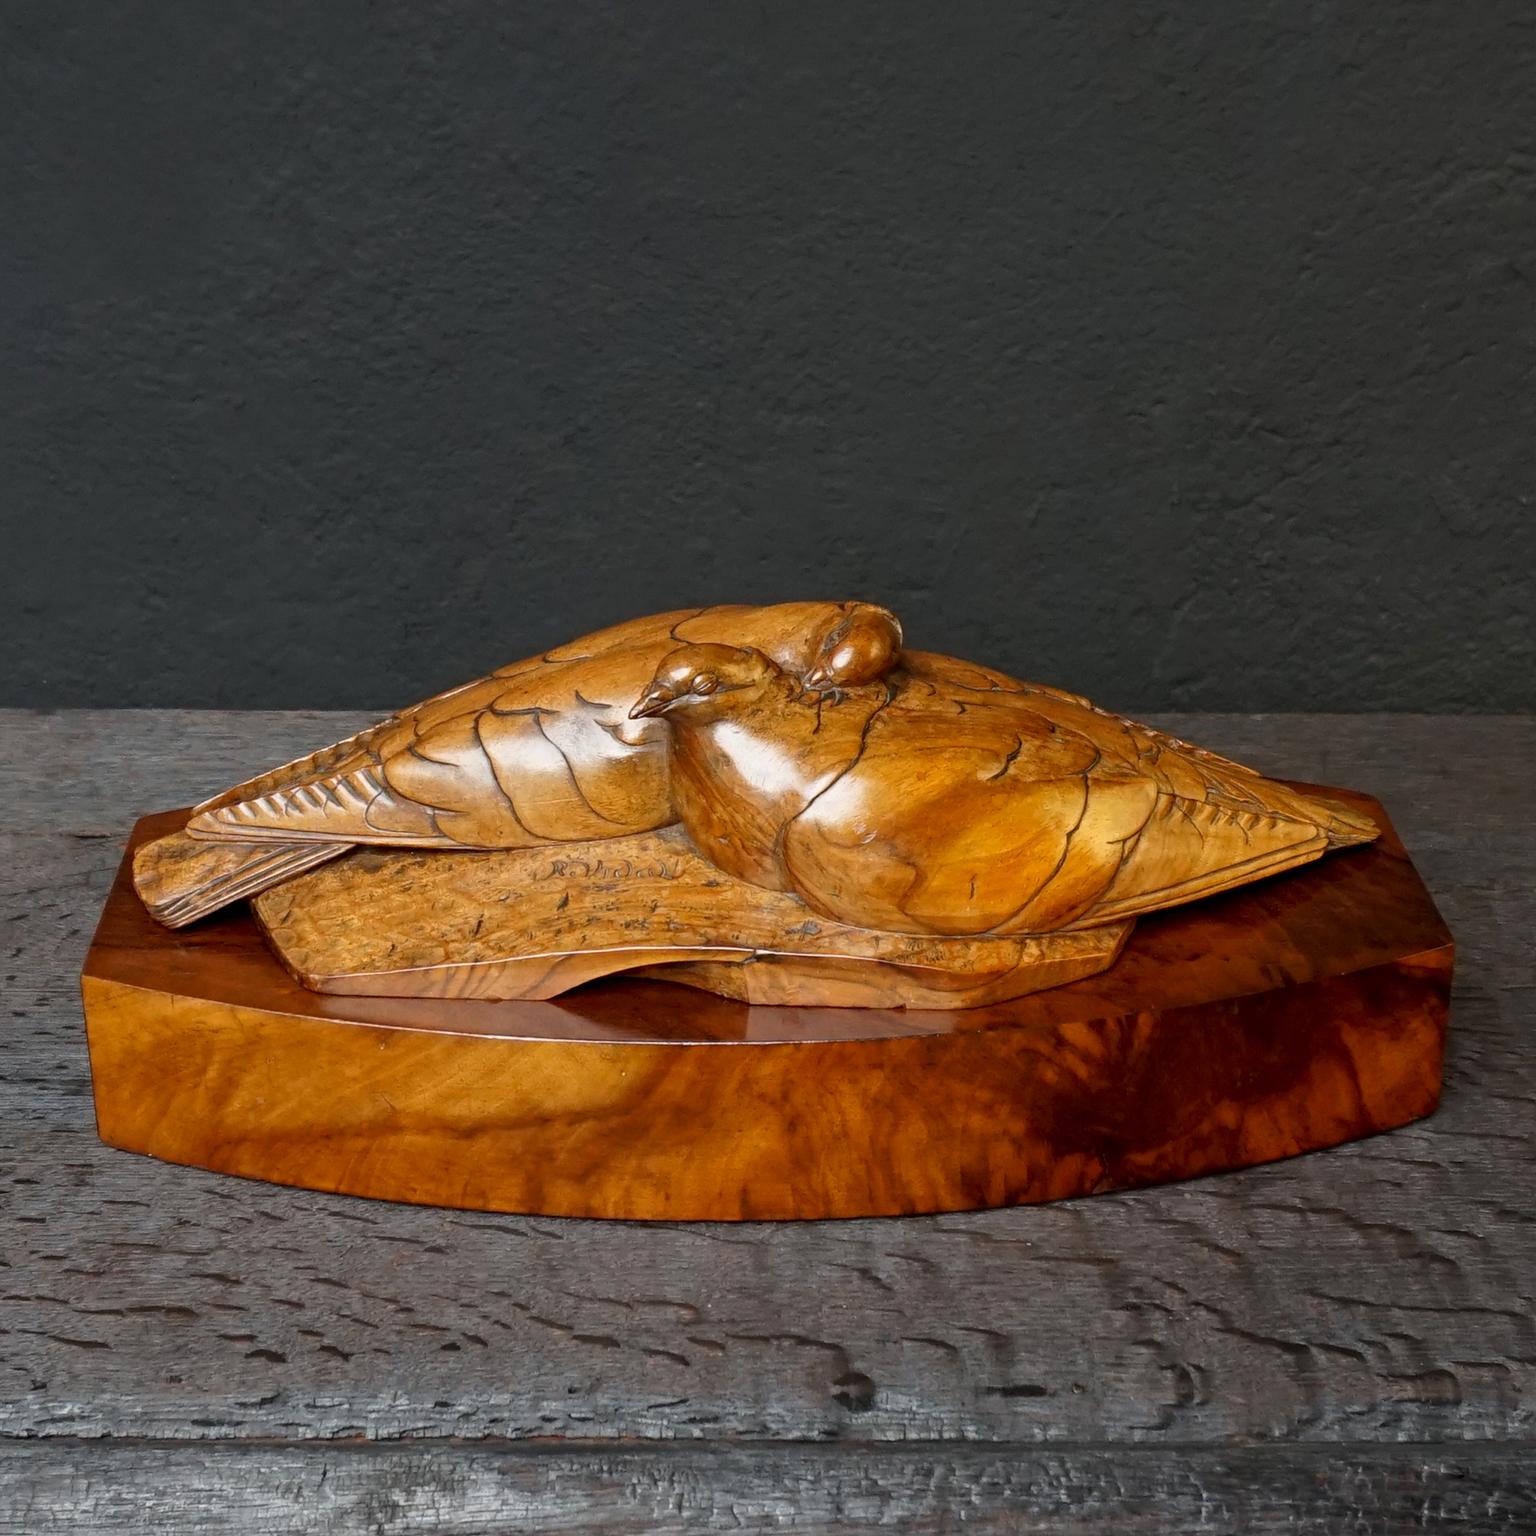 Very pretty Art Deco love letter box in carved walnut wood, would also be great to keep jewellery in.
Two detailed carved doves lying in an amorous embrace pose on a wooden base in which a love letter compartment is 'hiding'.

The 'box' part is